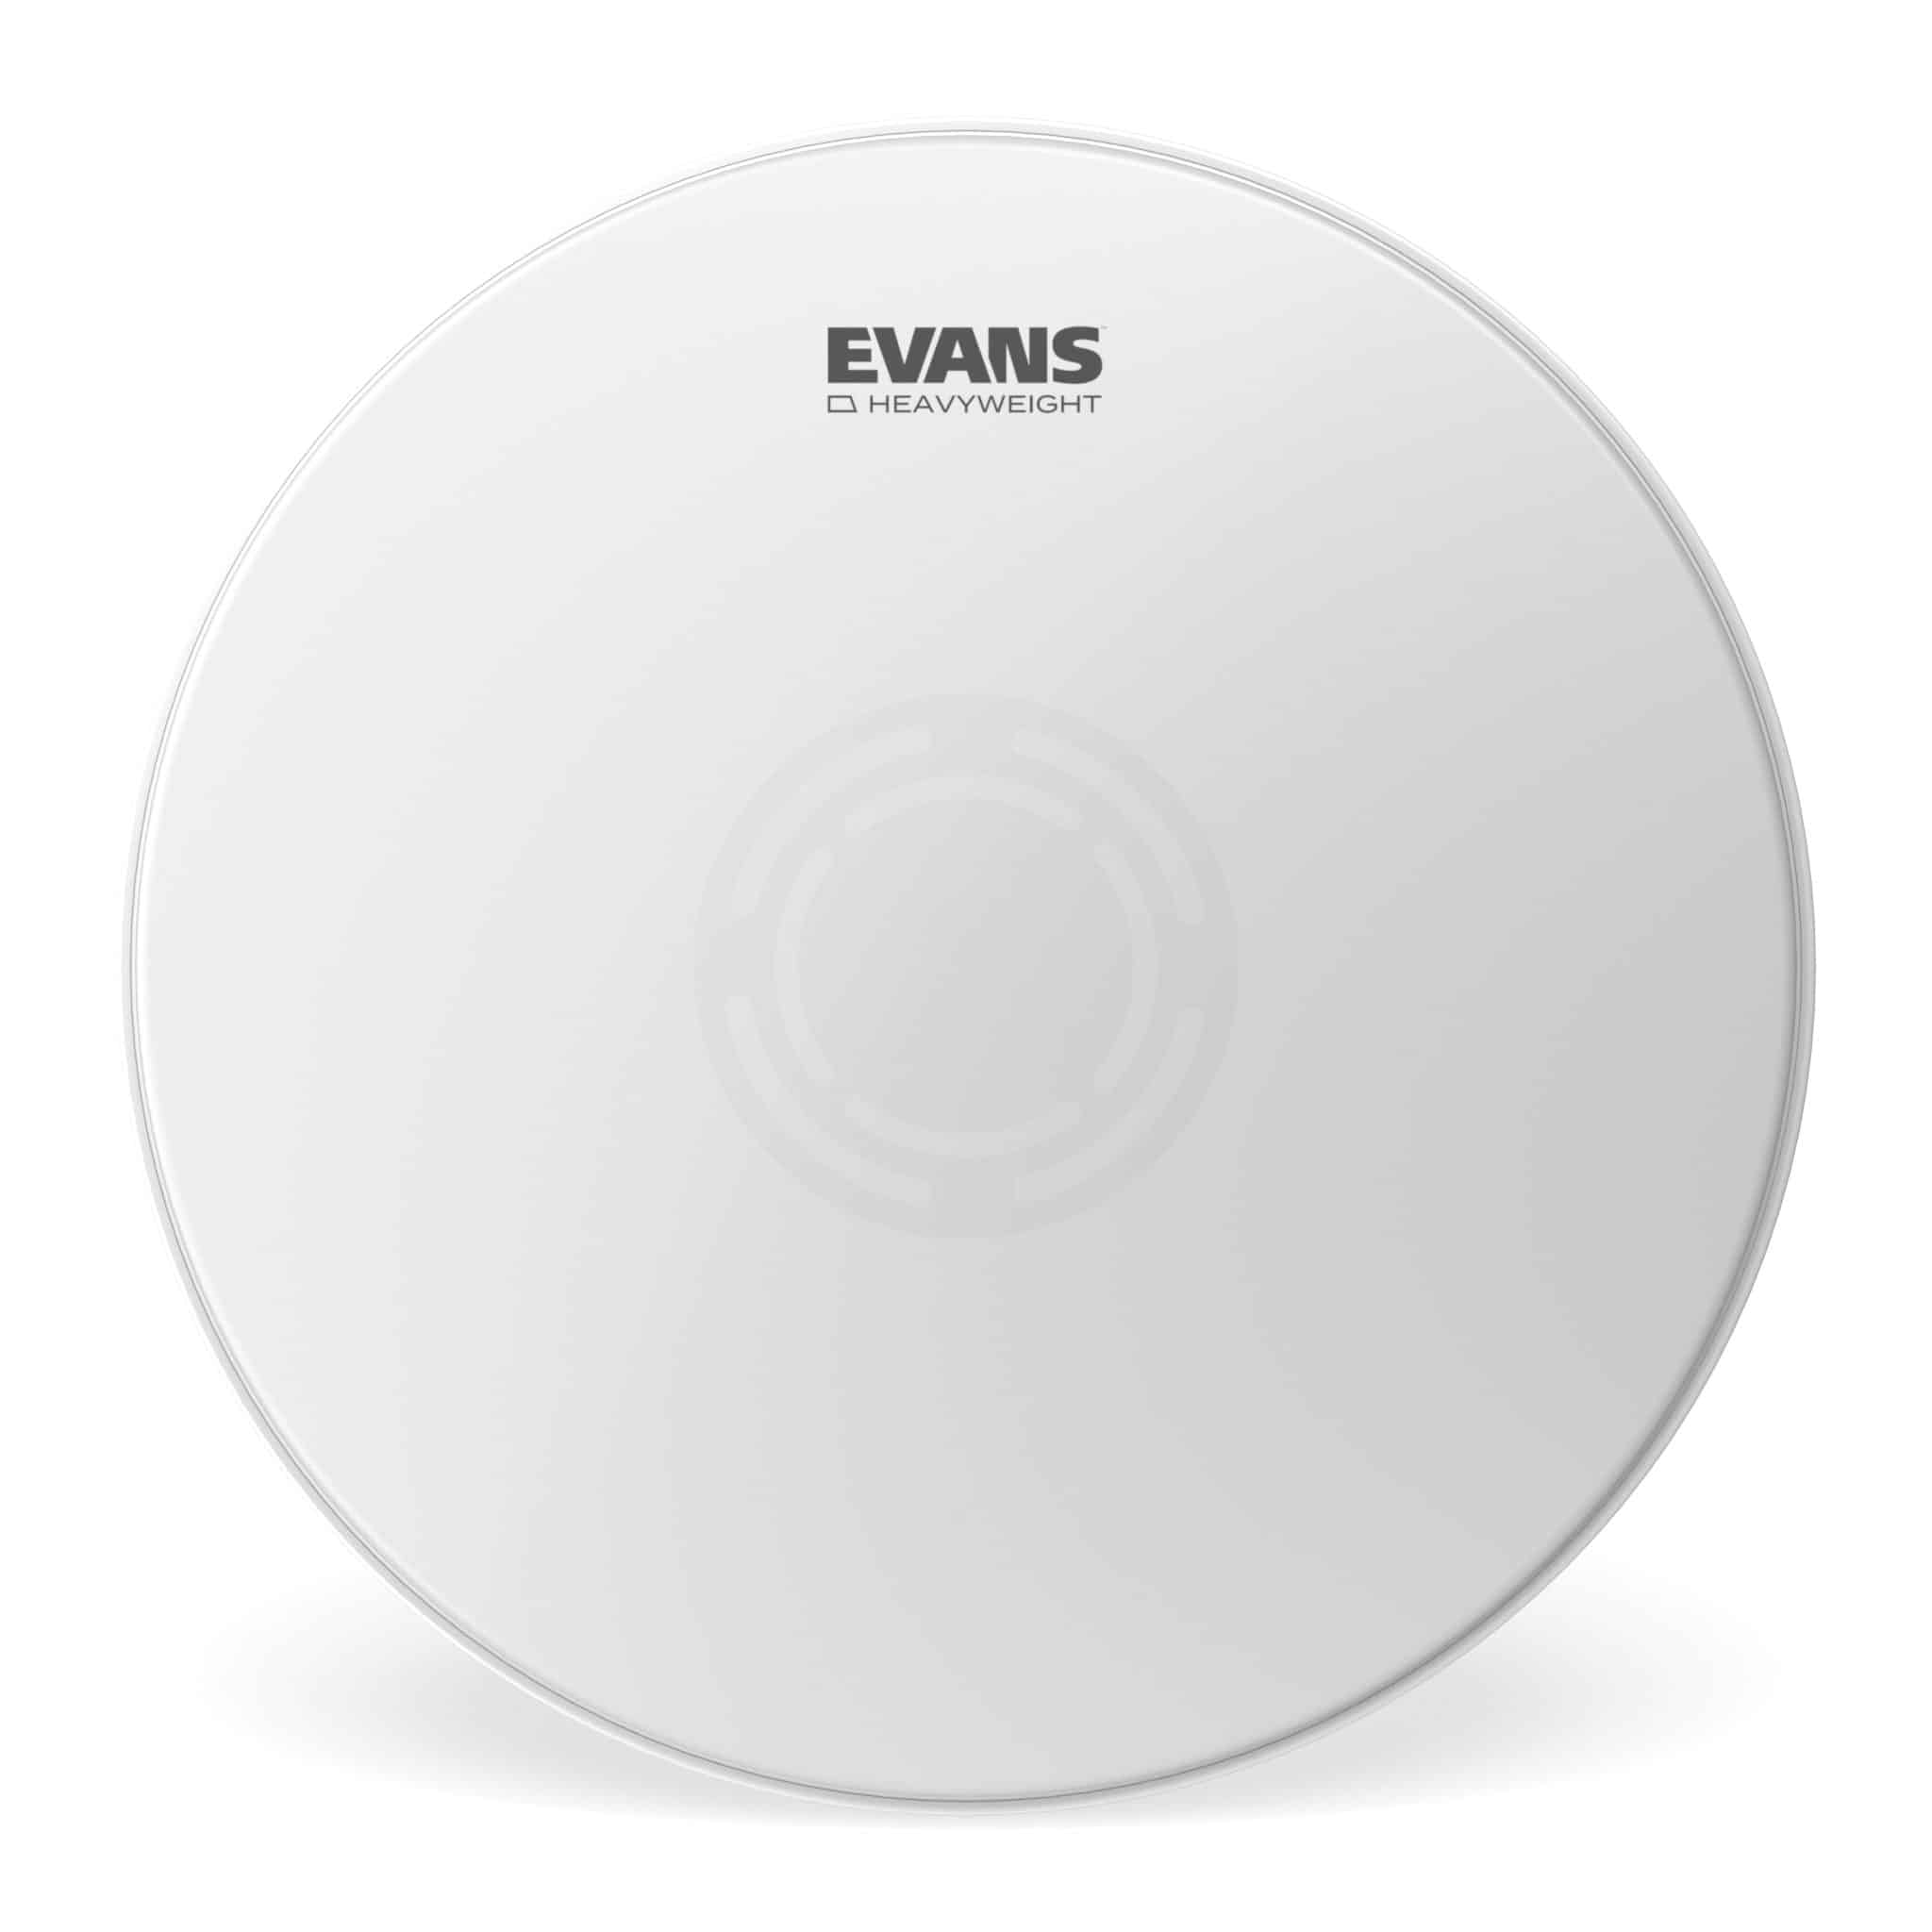 Evans Heavyweight Coated 14in Snare Head 4